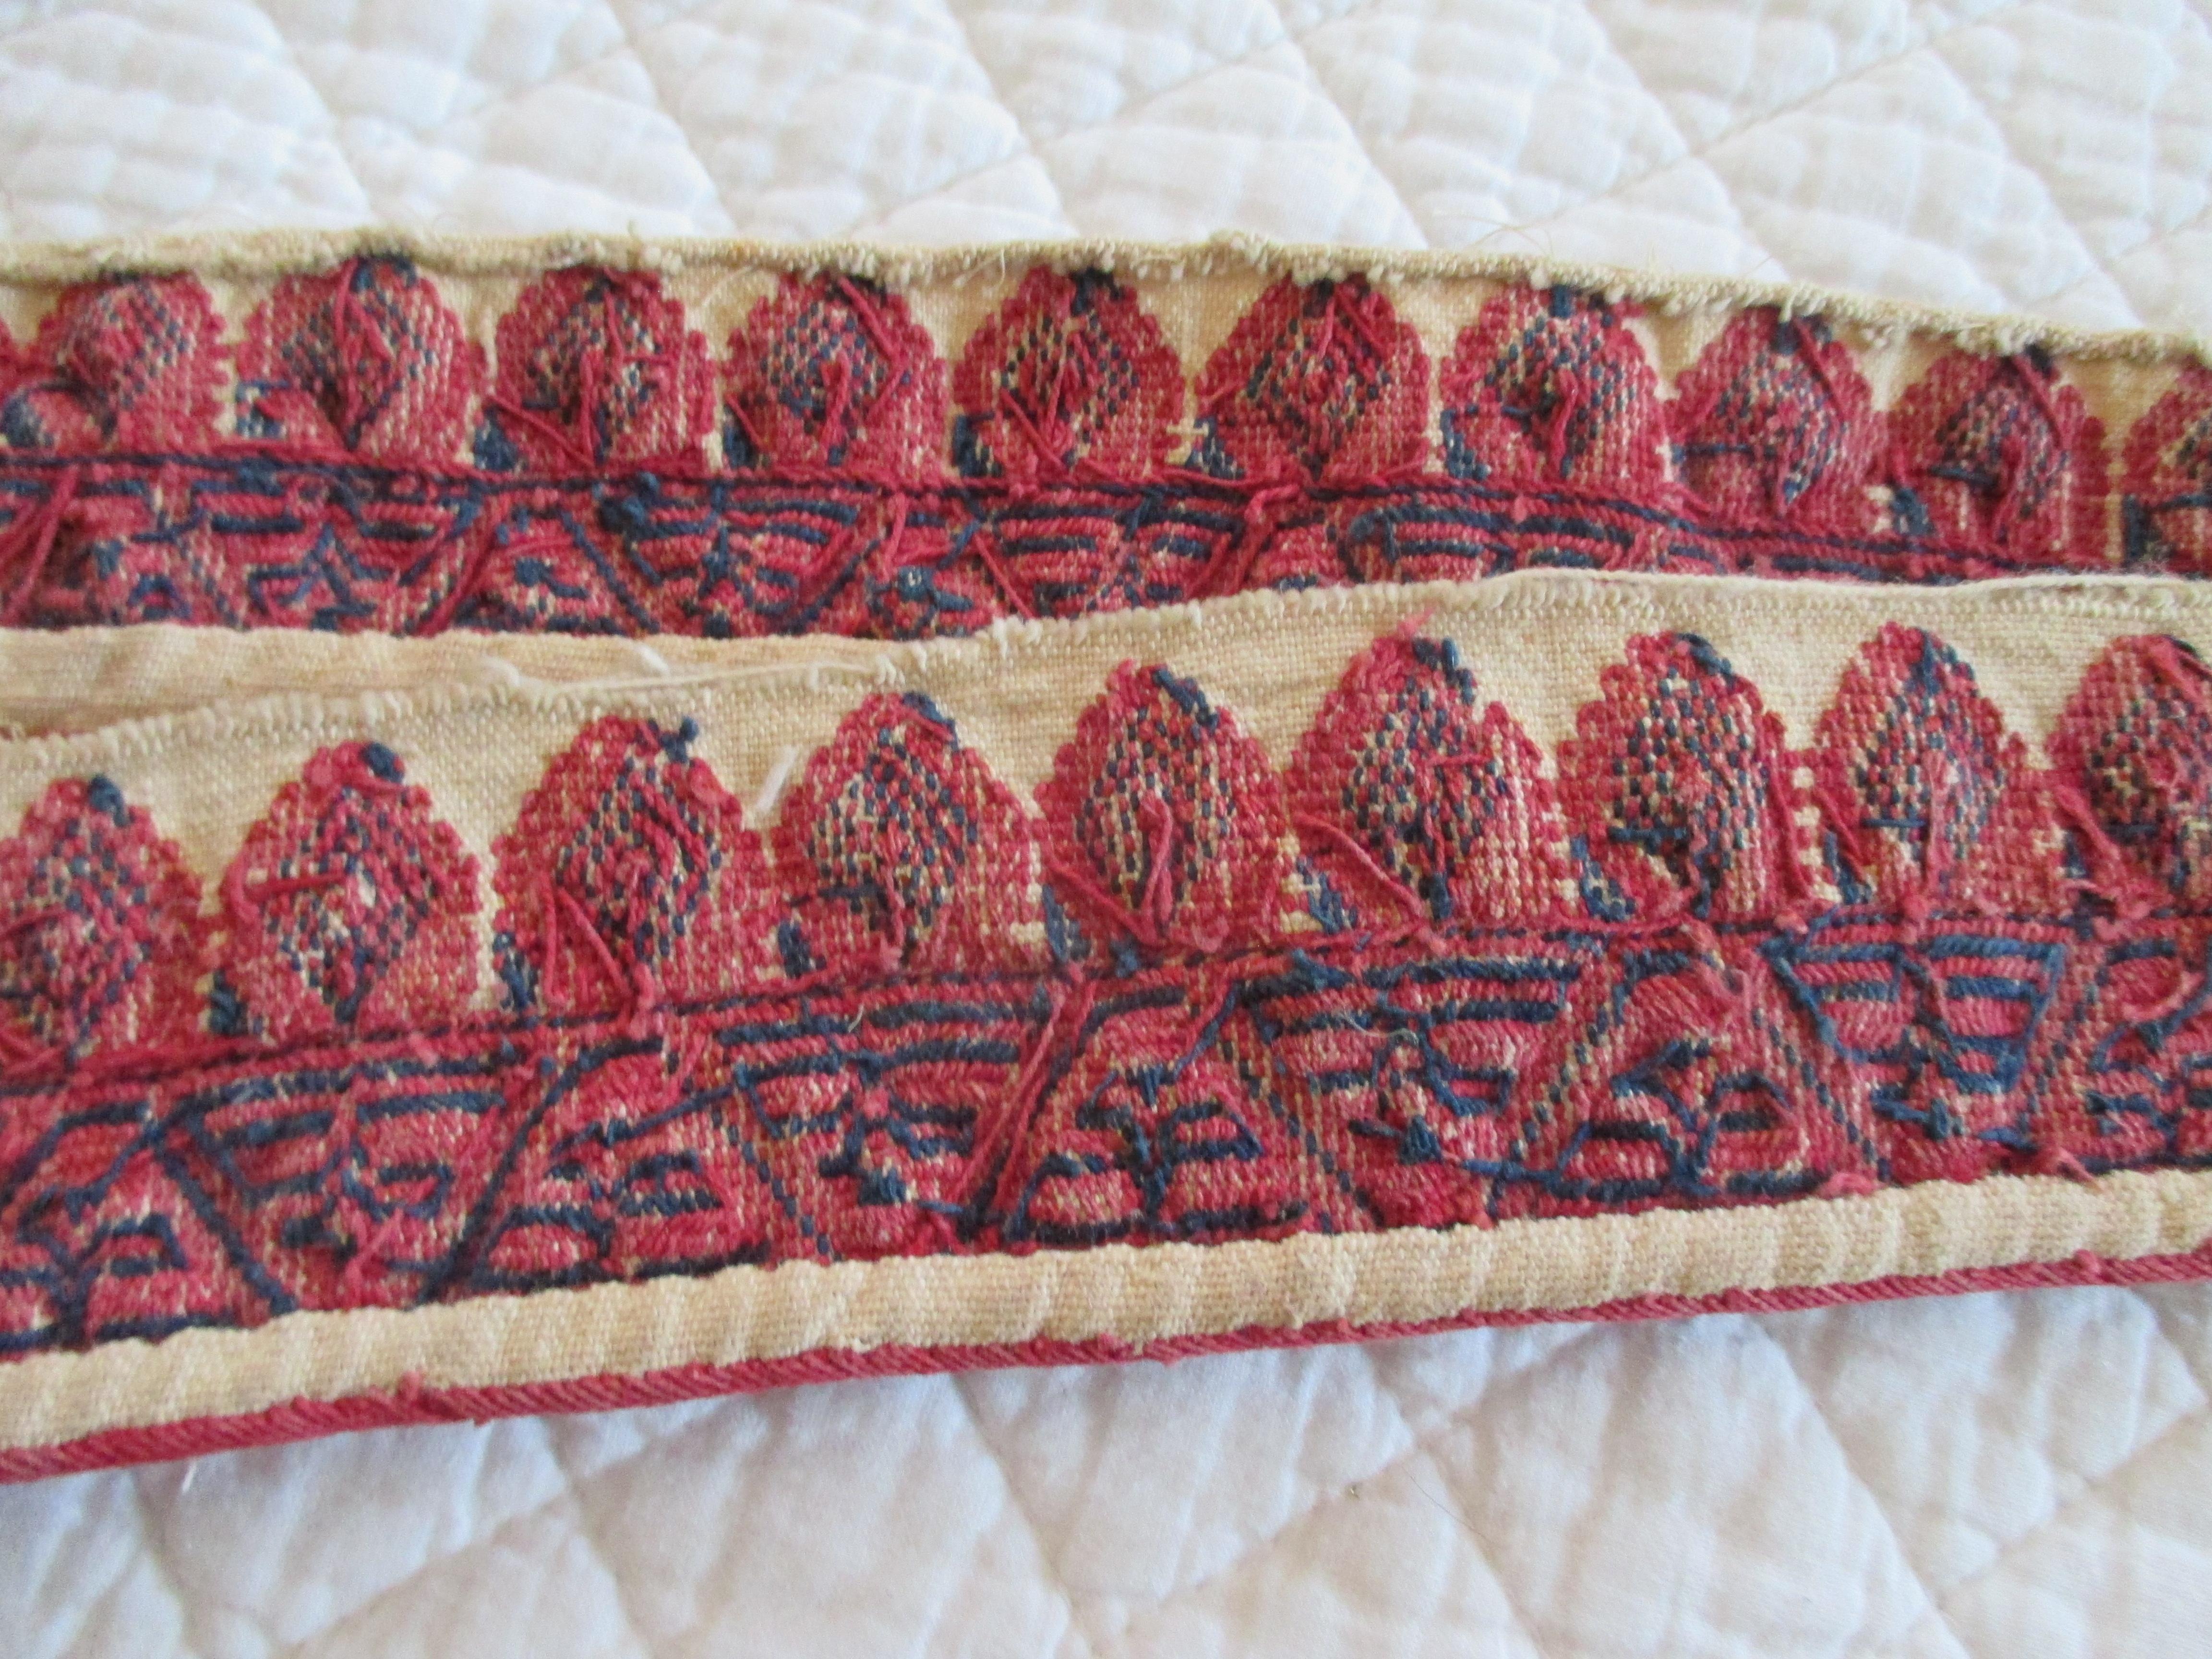 Nepalese Antique Red and Blue Woven Decorative Linen Trim